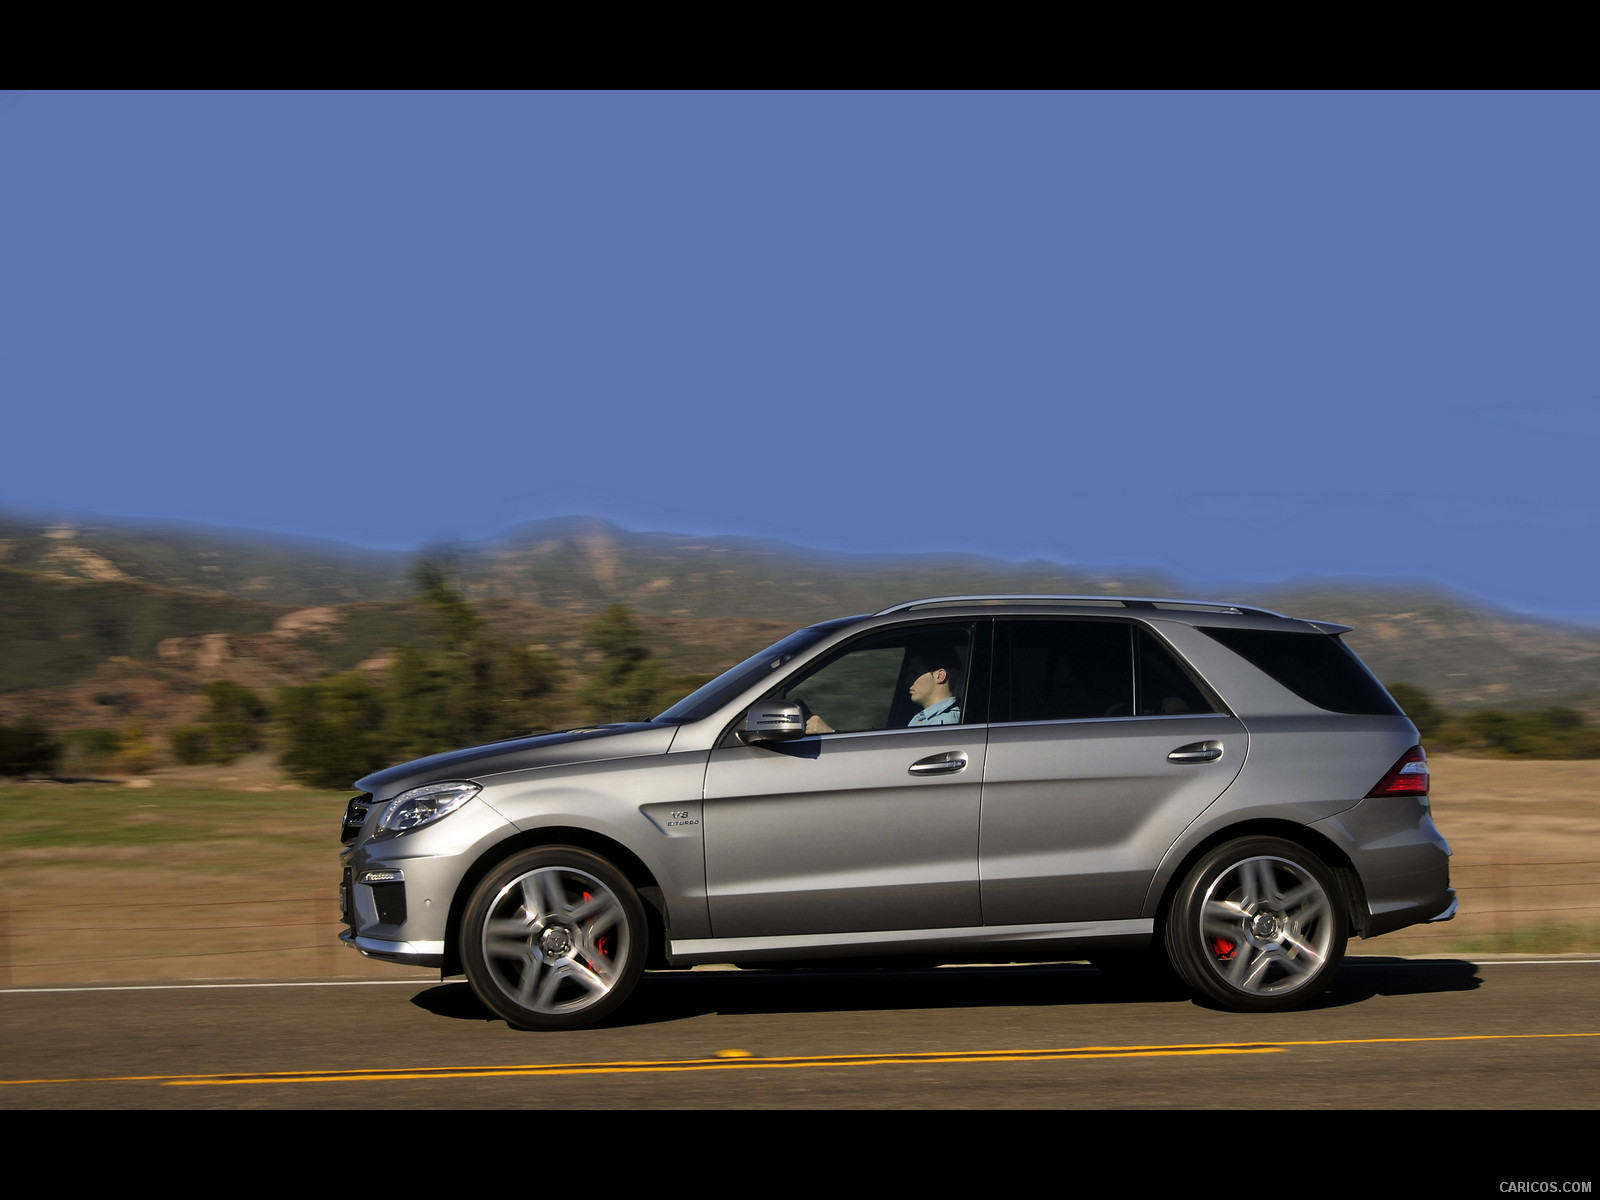 Mercedes-Benz (2012) ML 63 AMG  - Side, #35 of 89